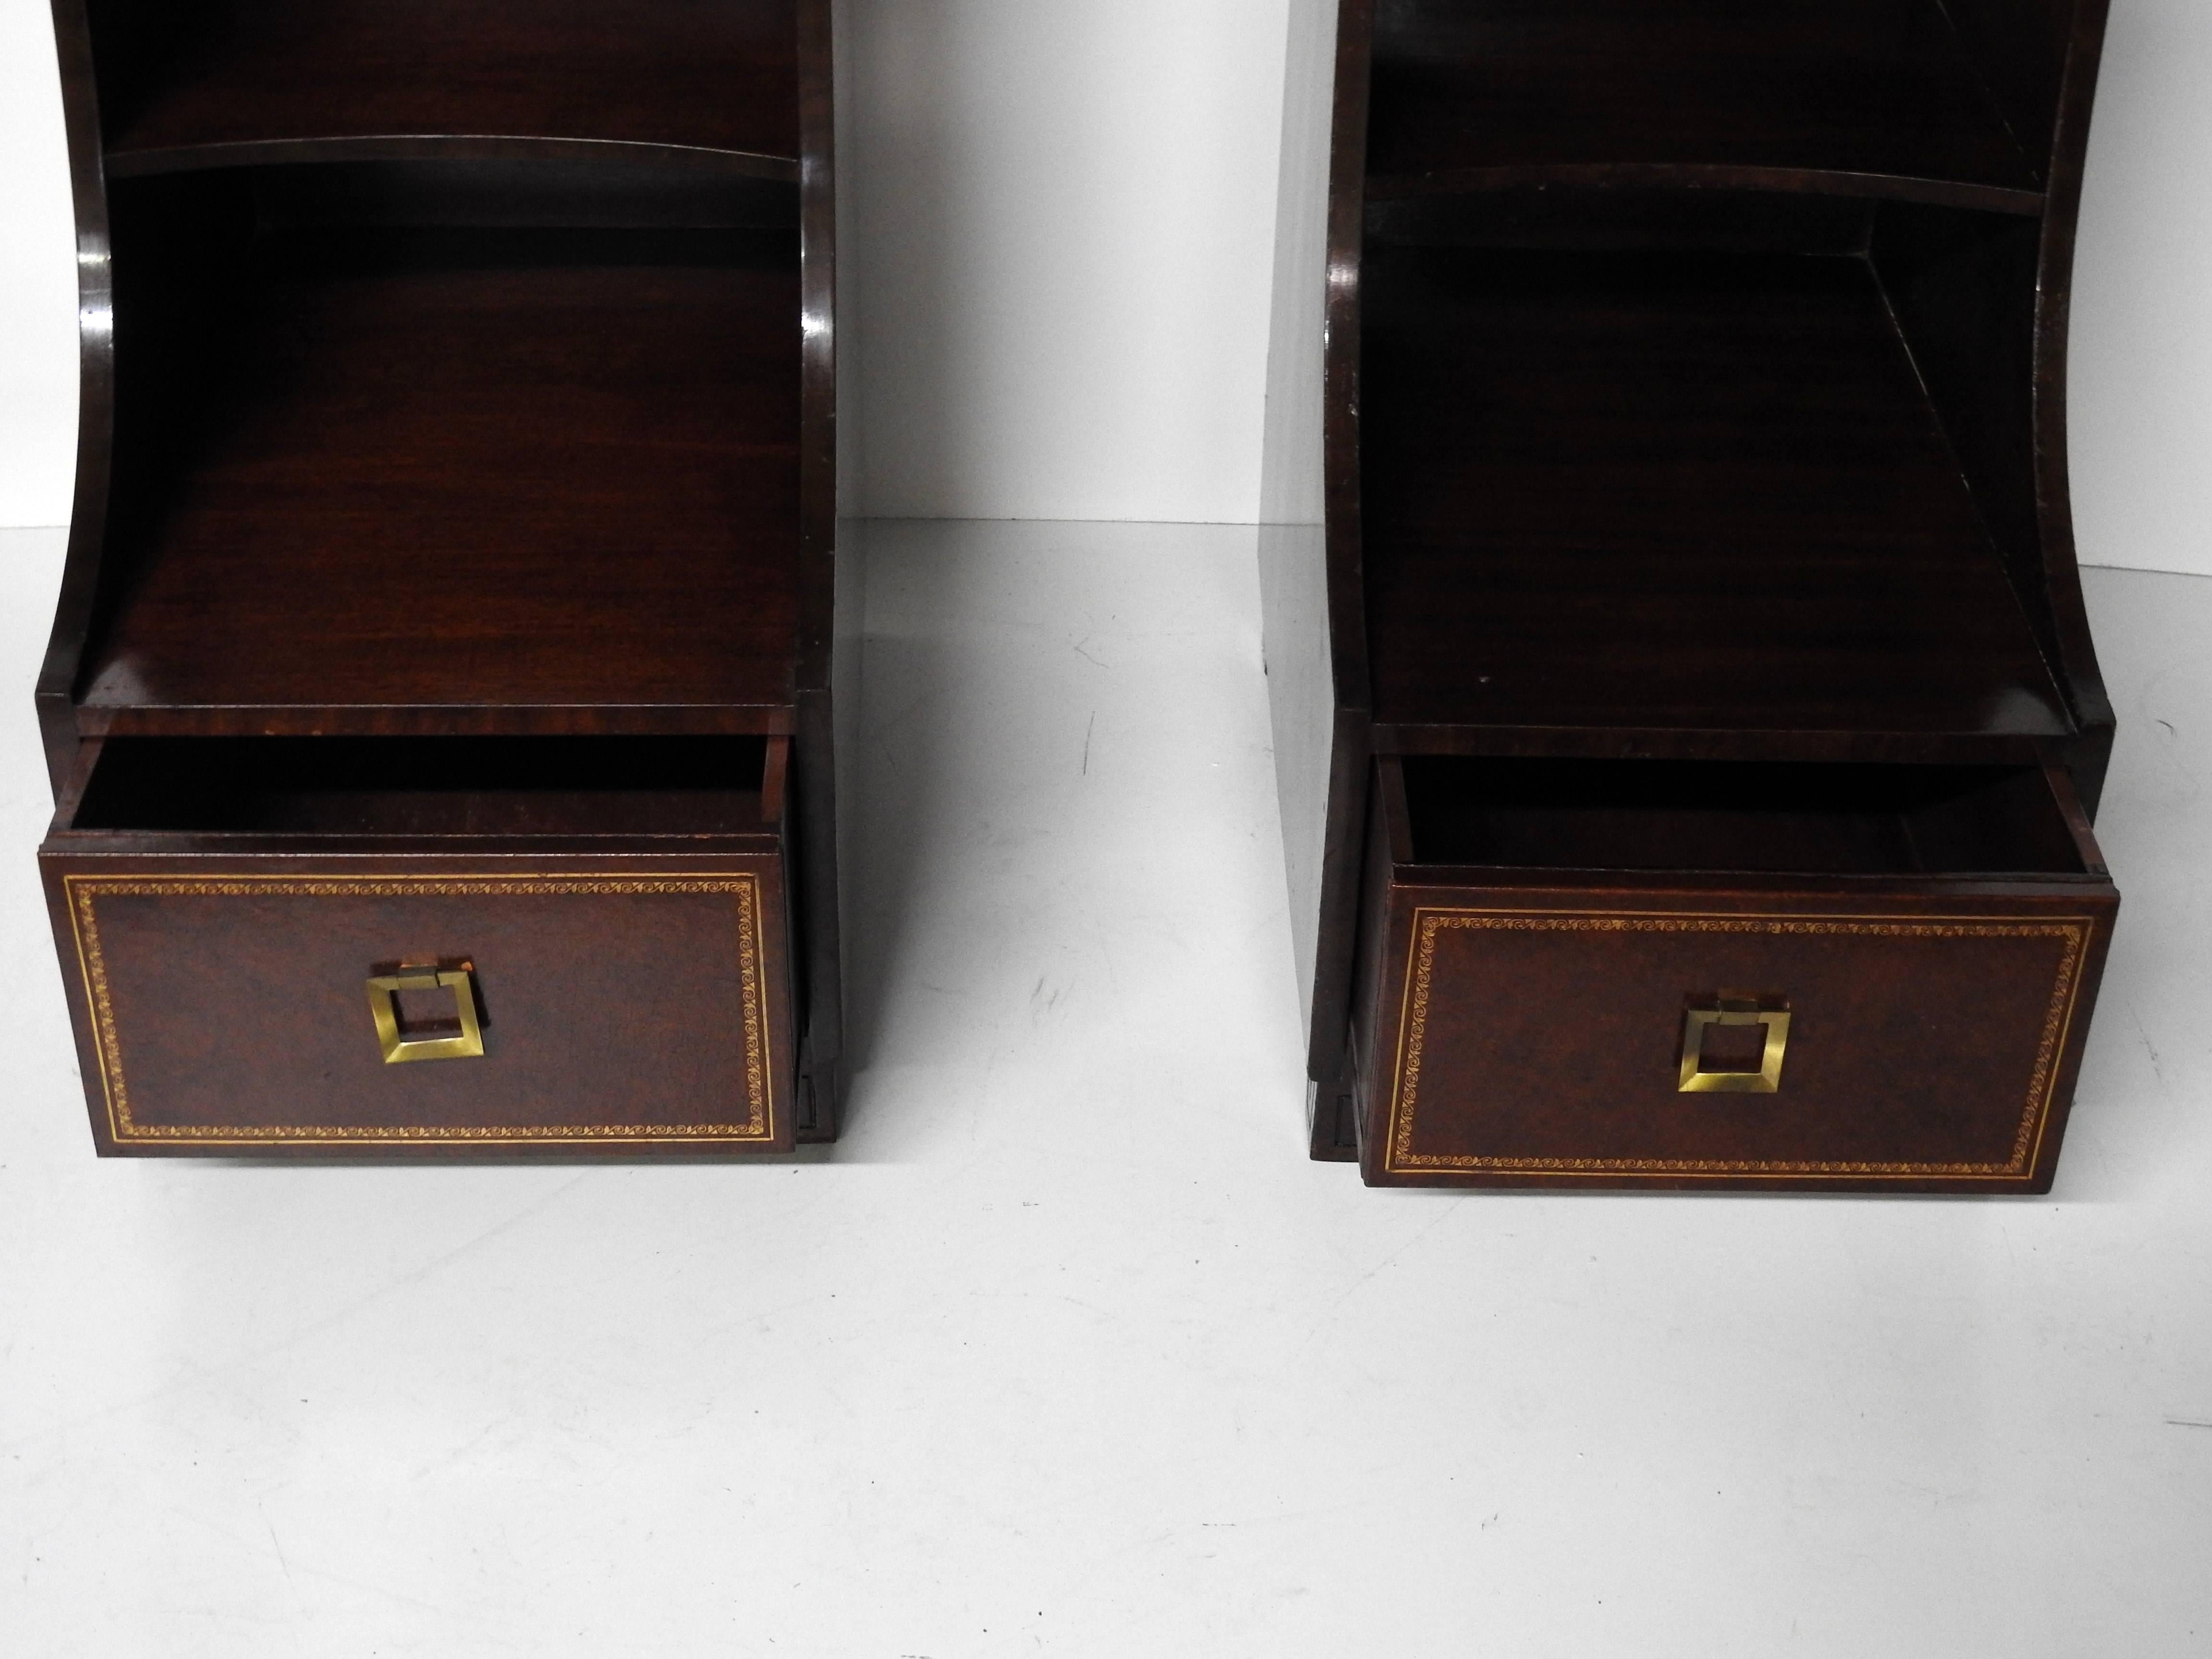 Pair of Classic Asian Modern design step end tables with tooled leather drawer facings.